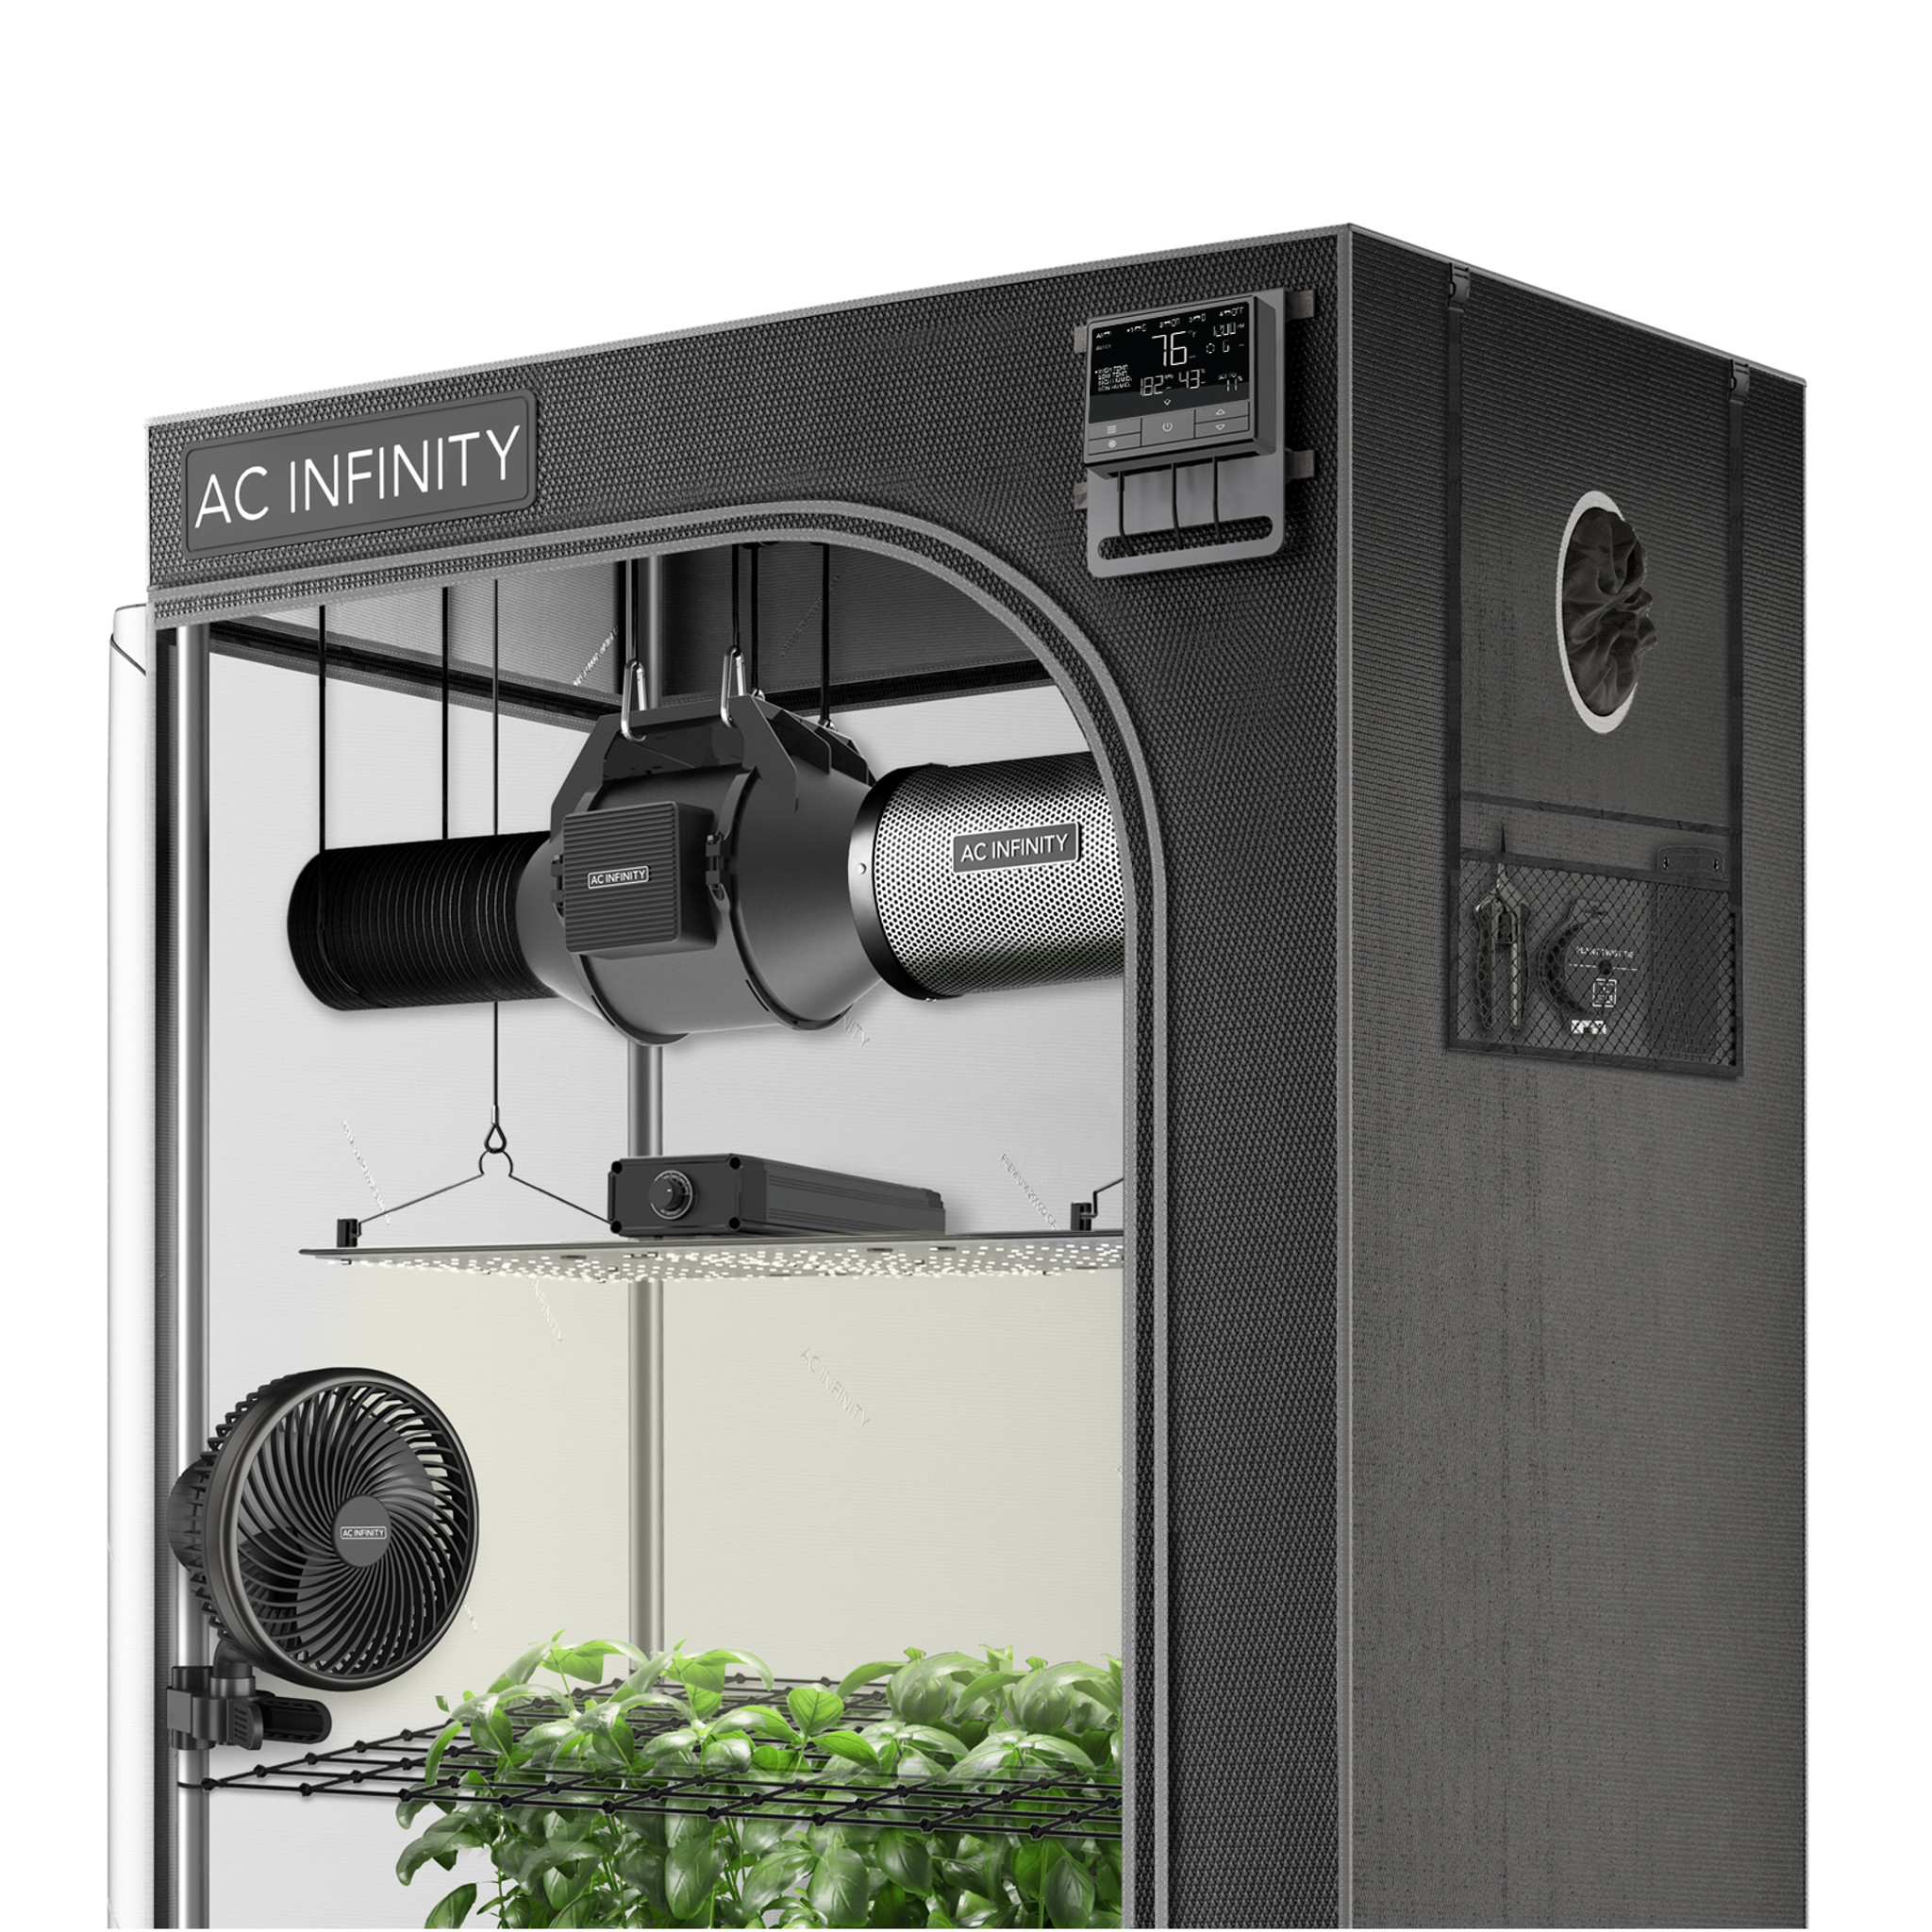 Advance Grow Tent System 2-Plant Kit, WiFi-Integrated Controls to Automate Ventilation, Circulation, Full Spectrum LED Grow Light - AC Infinity